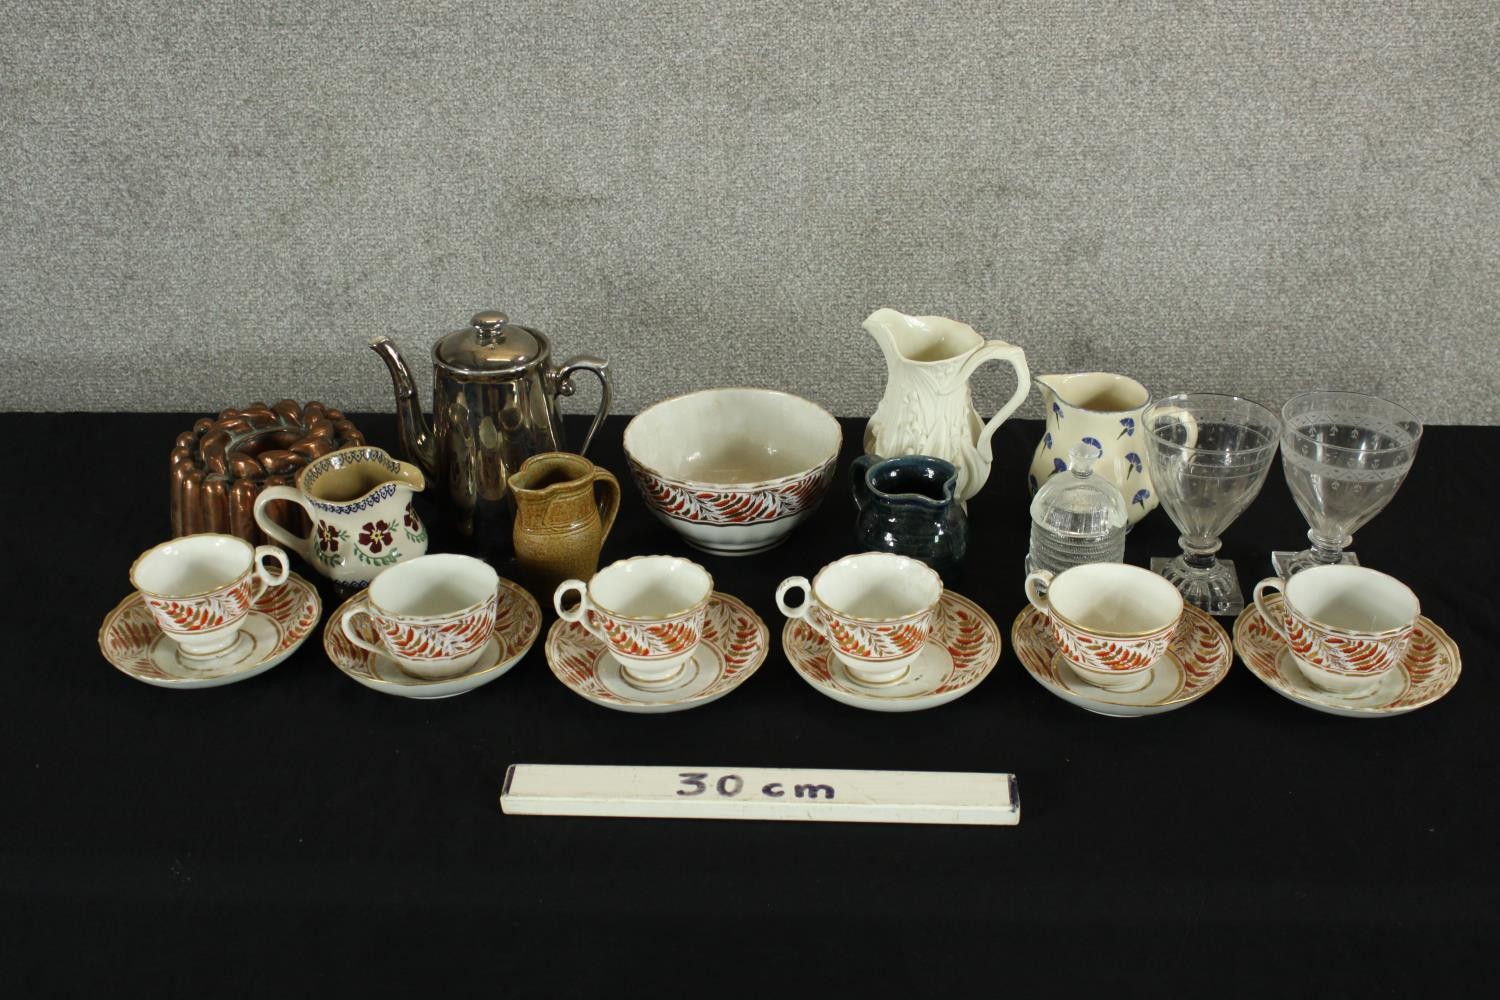 A 19th century English porcelain, possibly Worcester part teaset decorated with abstract pattern, - Image 2 of 2